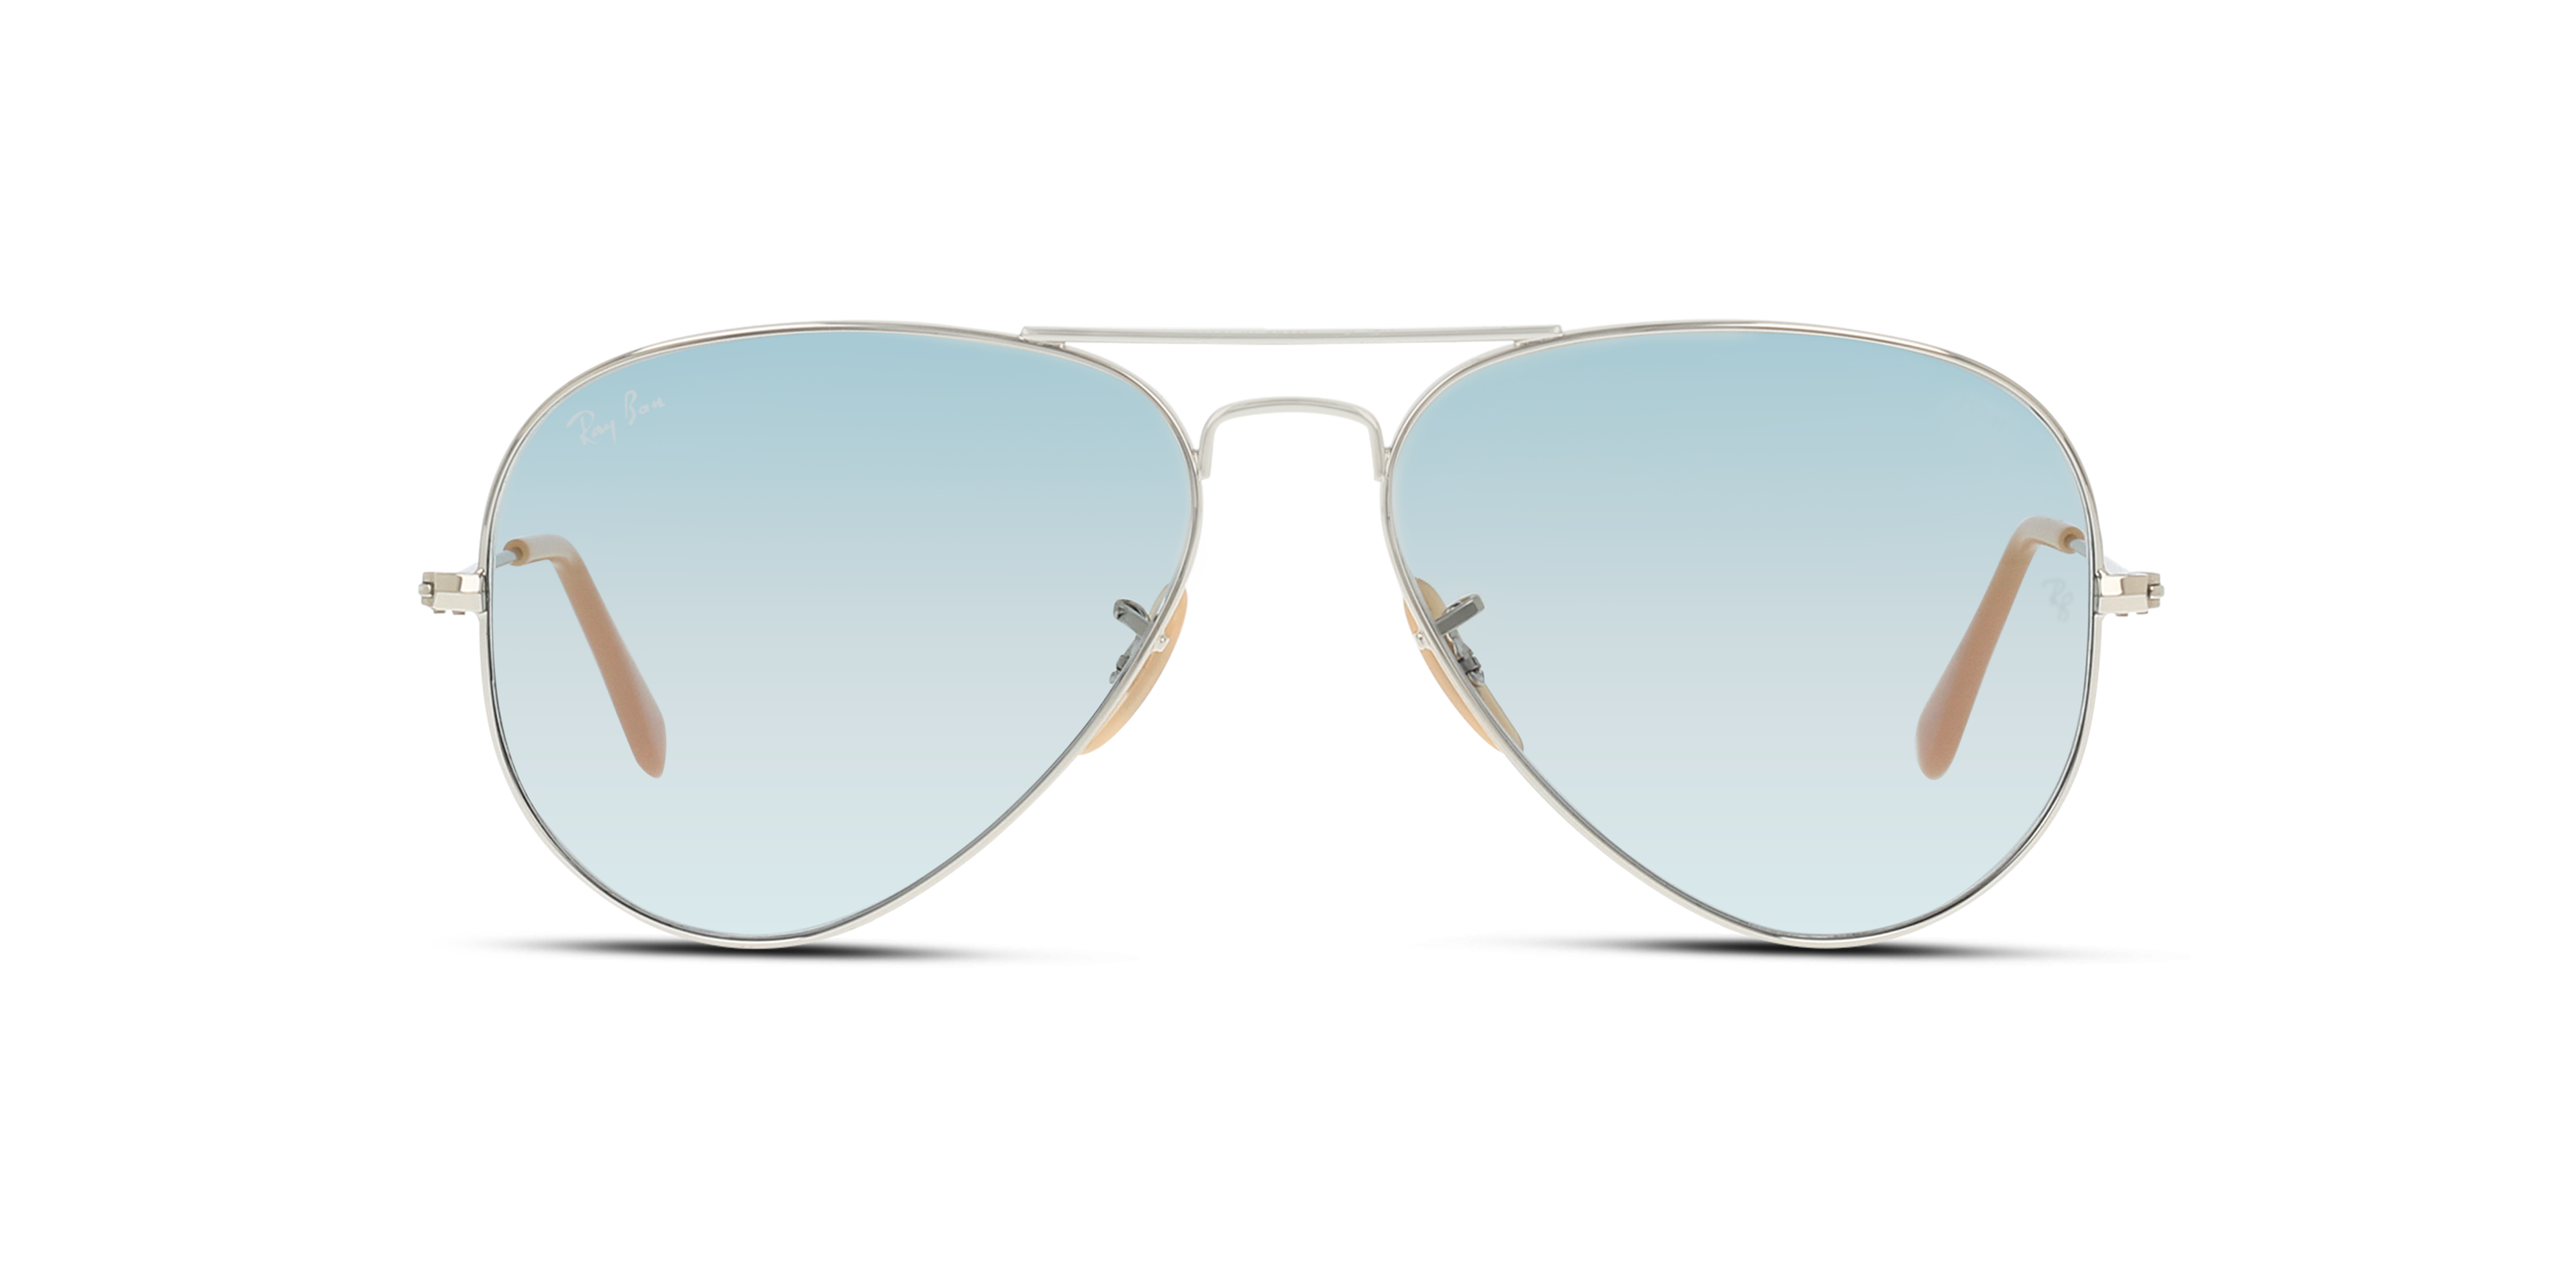 [products.image.front] Ray-Ban Aviator Washed Evolve RB3025 9065I5